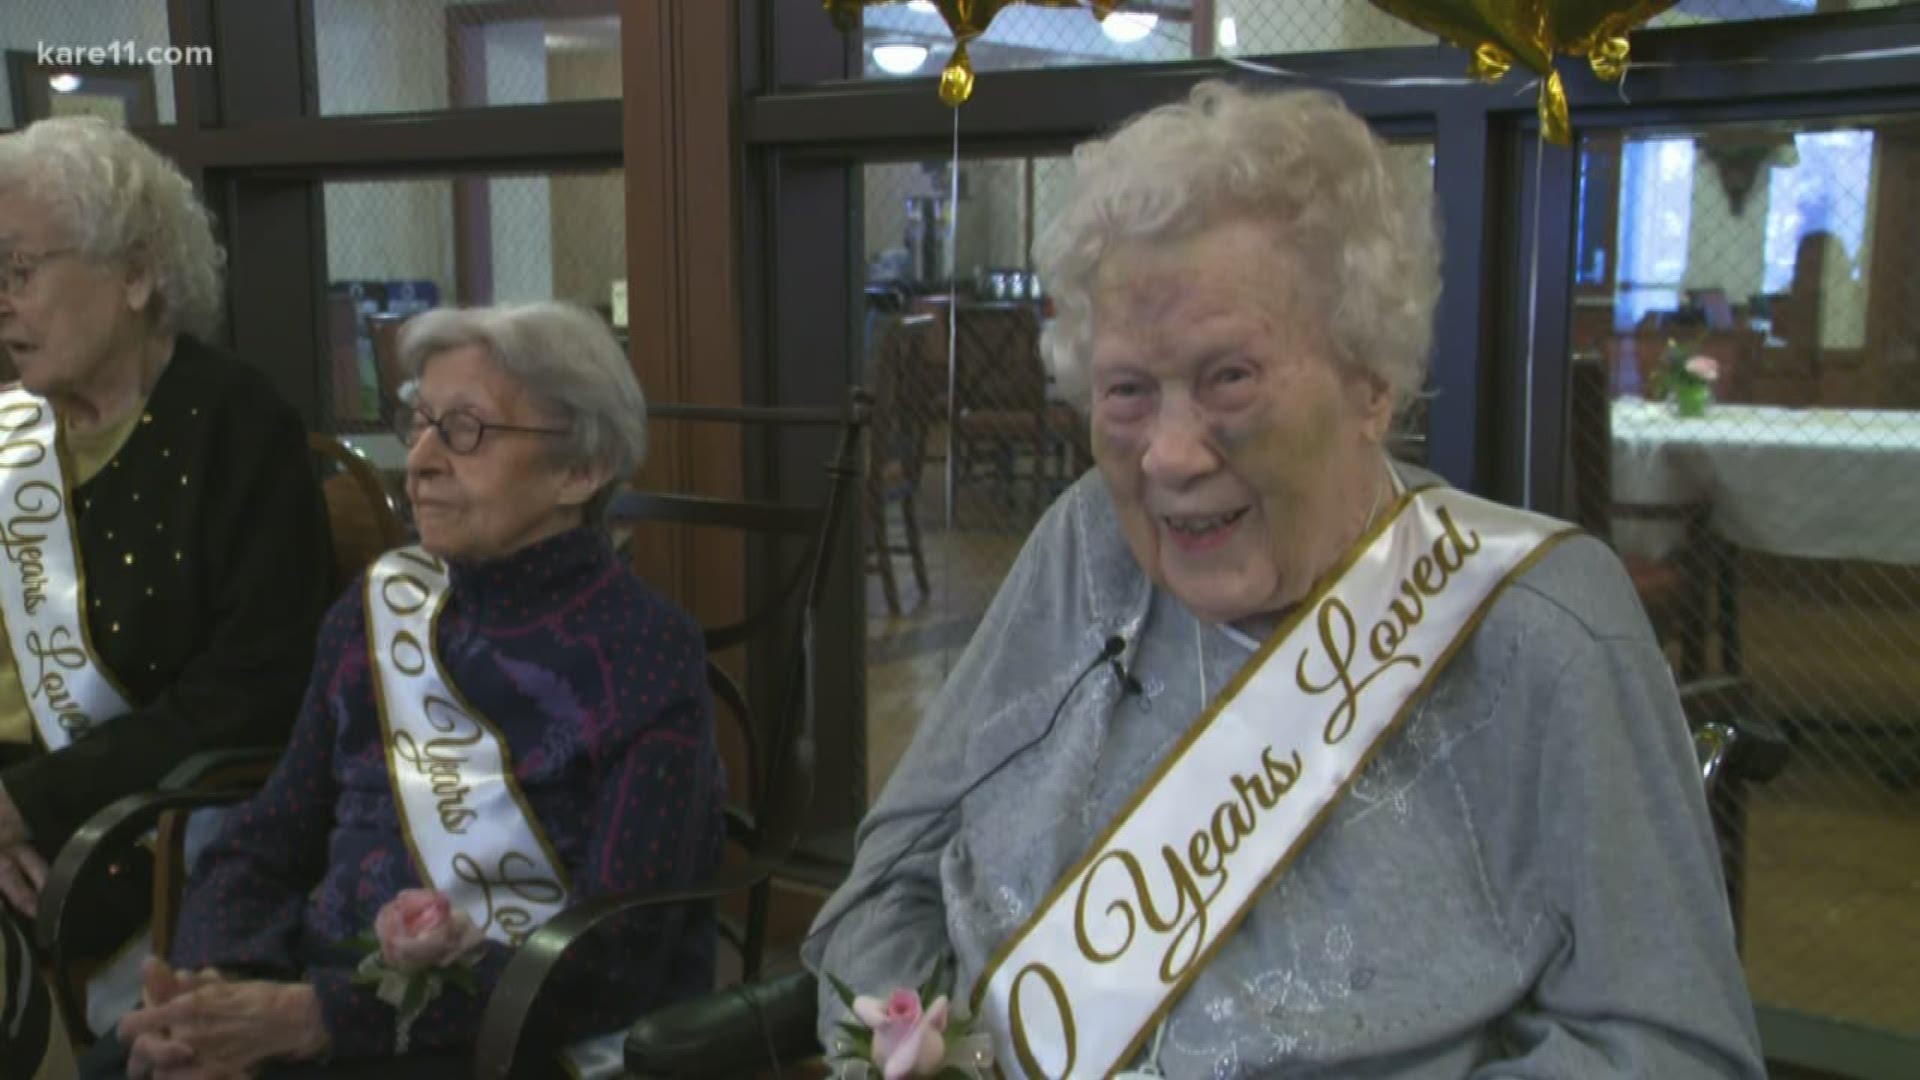 Watch this celebration at an Edina nursing home for a group of women who have marked many milestones.